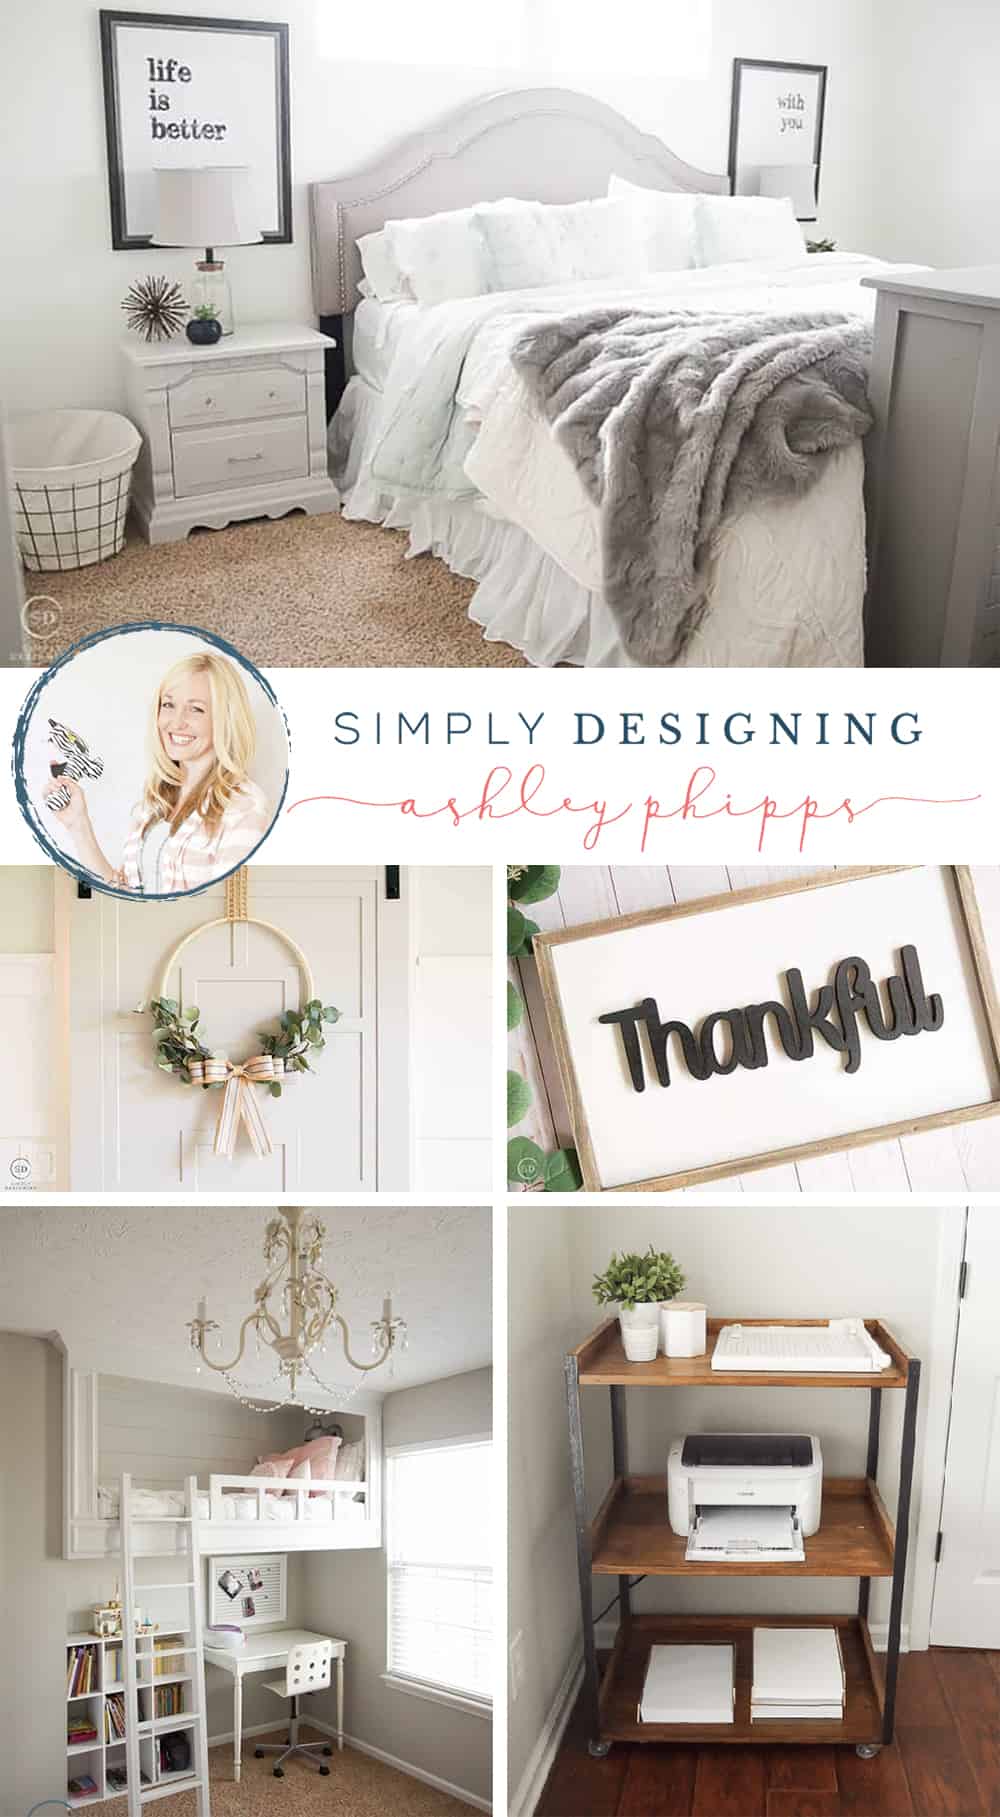 SimplyDesigning AshleyPhipps 45 Light Bright and Beautiful Home Inspiration Ideas 1 Light Bright and Beautiful Home Inspiration